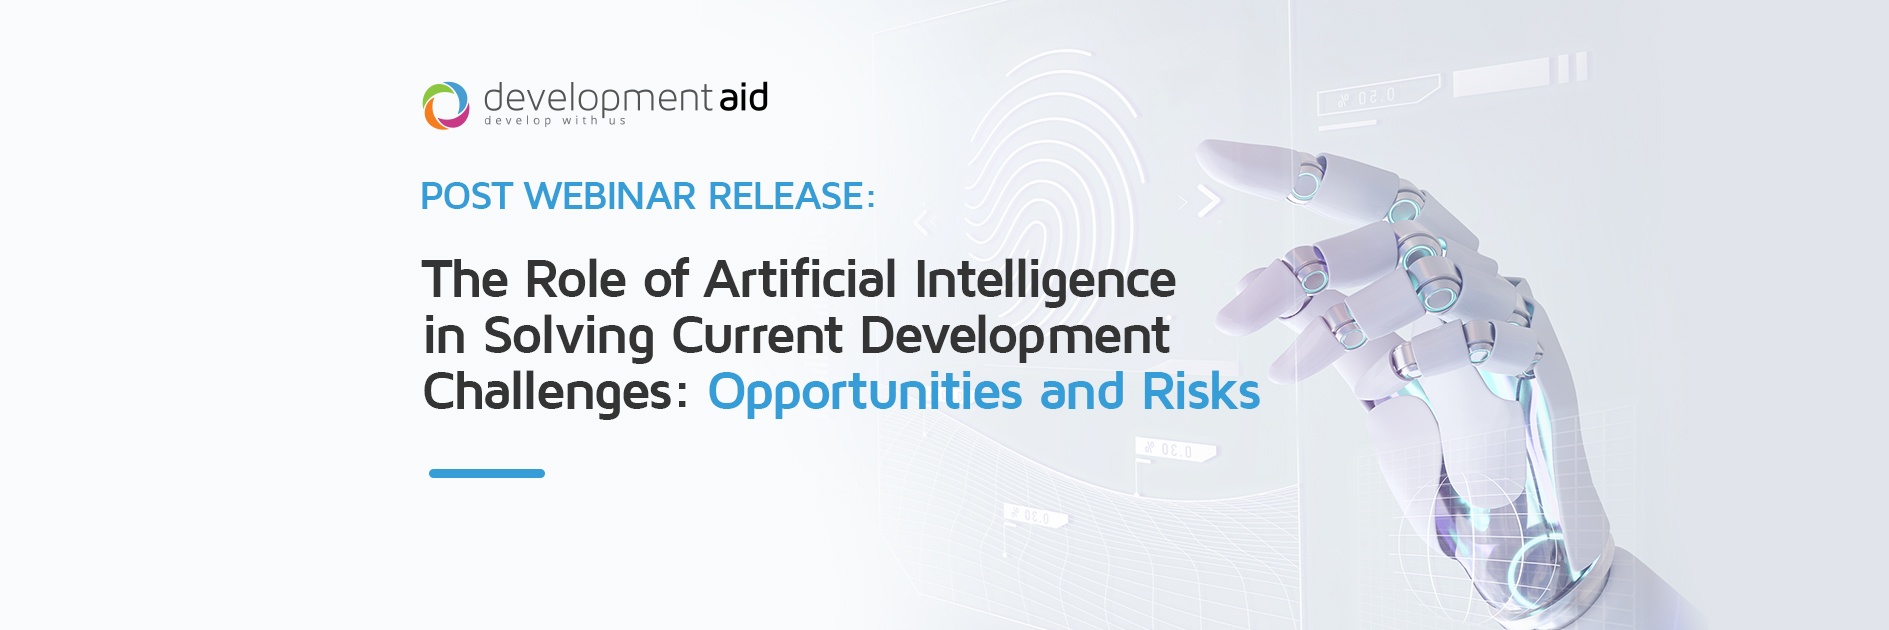 Post Webinar Release | The Role of Artificial Intelligence in Solving Current Development Challenges: Opportunities and Risks